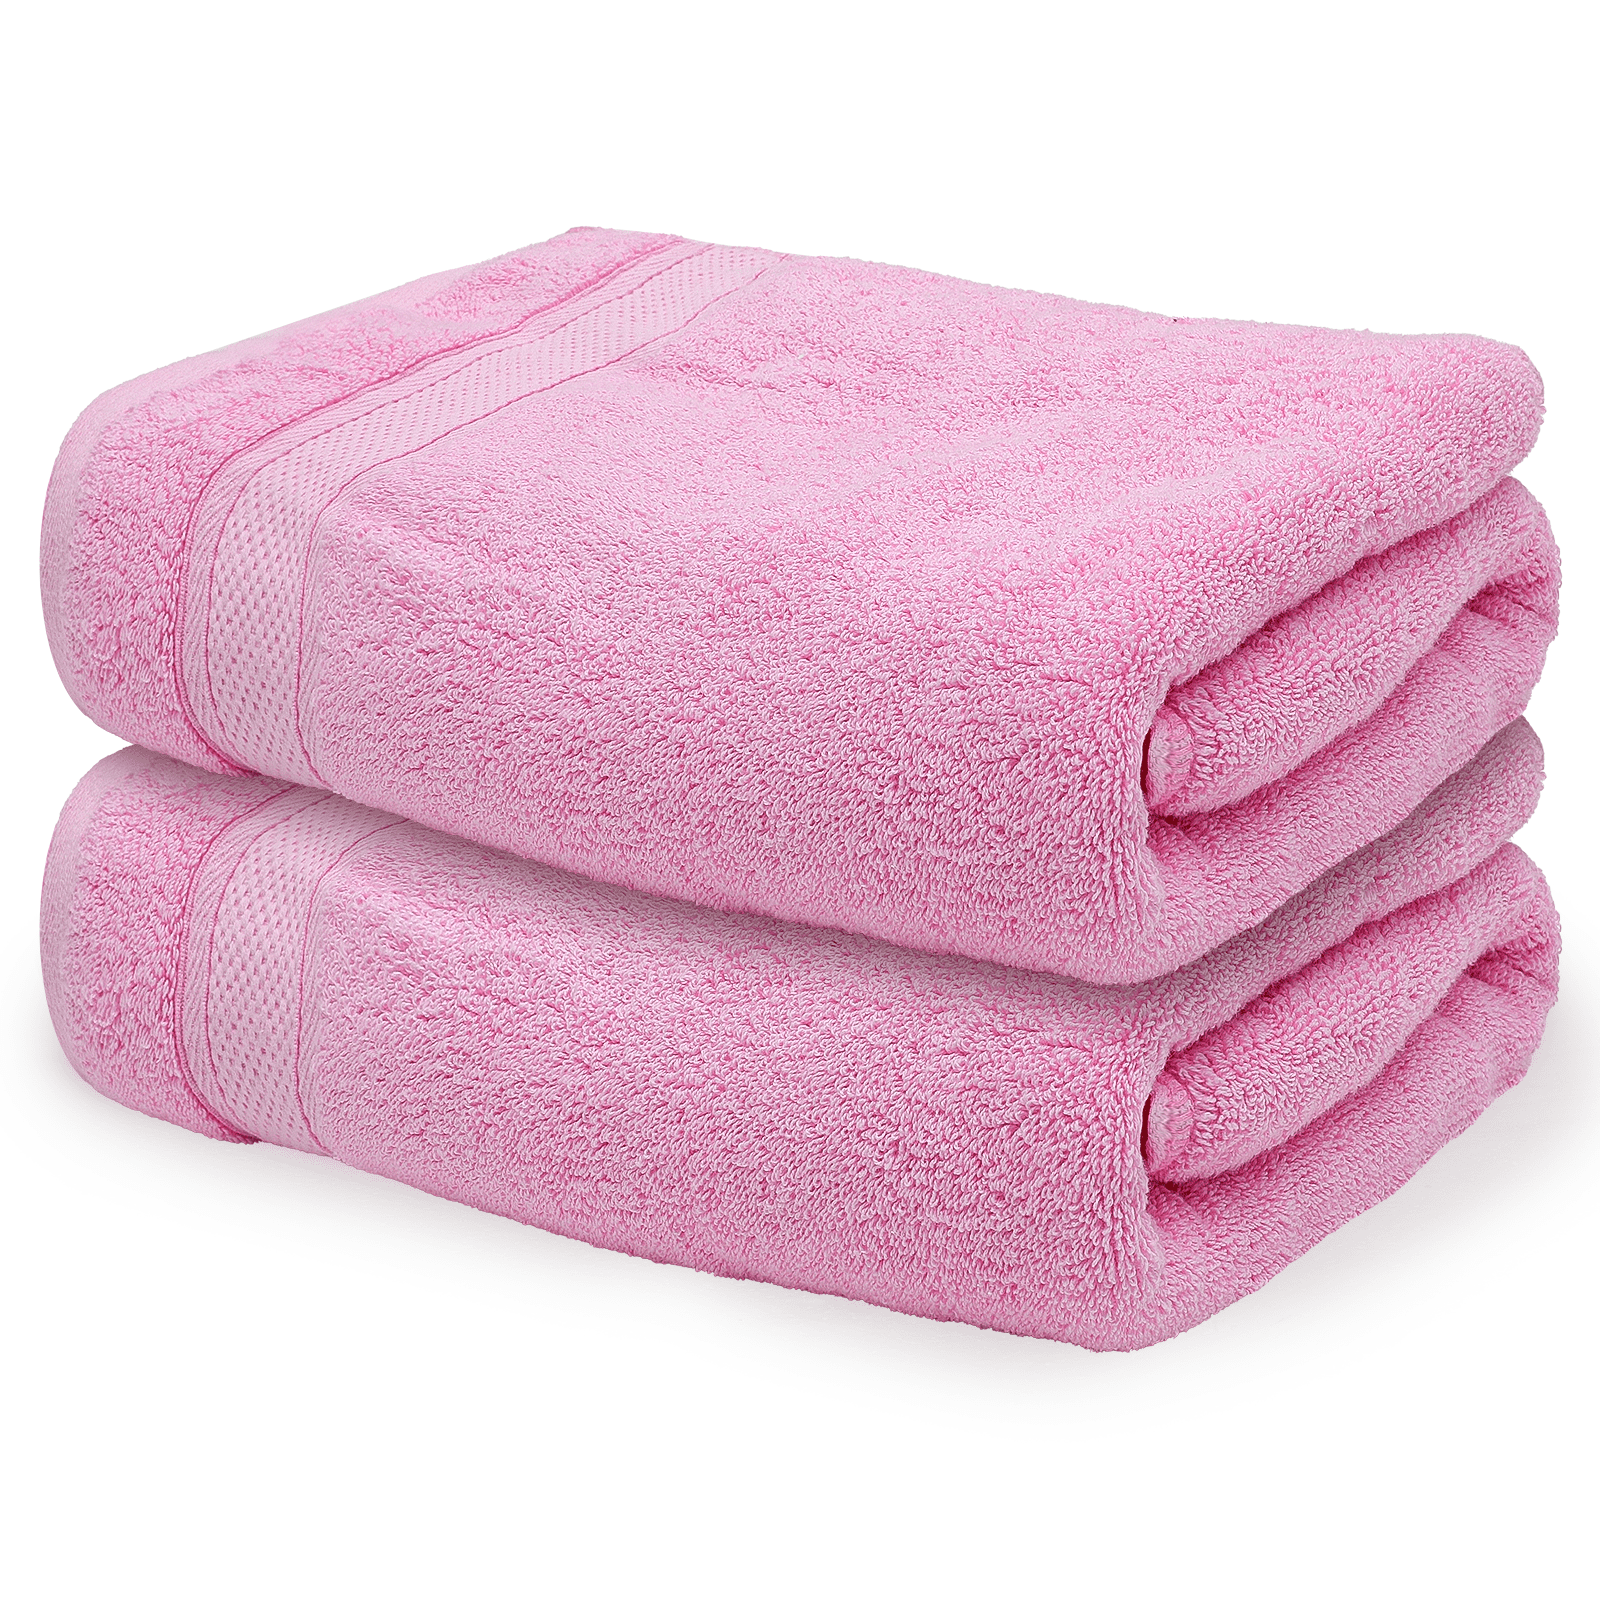 MoNiBloom Set of 2 Luxury Oversized Bath Sheet Towels, 35 x 70 in, 100%  Cotton Extra Large Bath Towels for Bathroom, Super Soft & High Absorbent,  Red